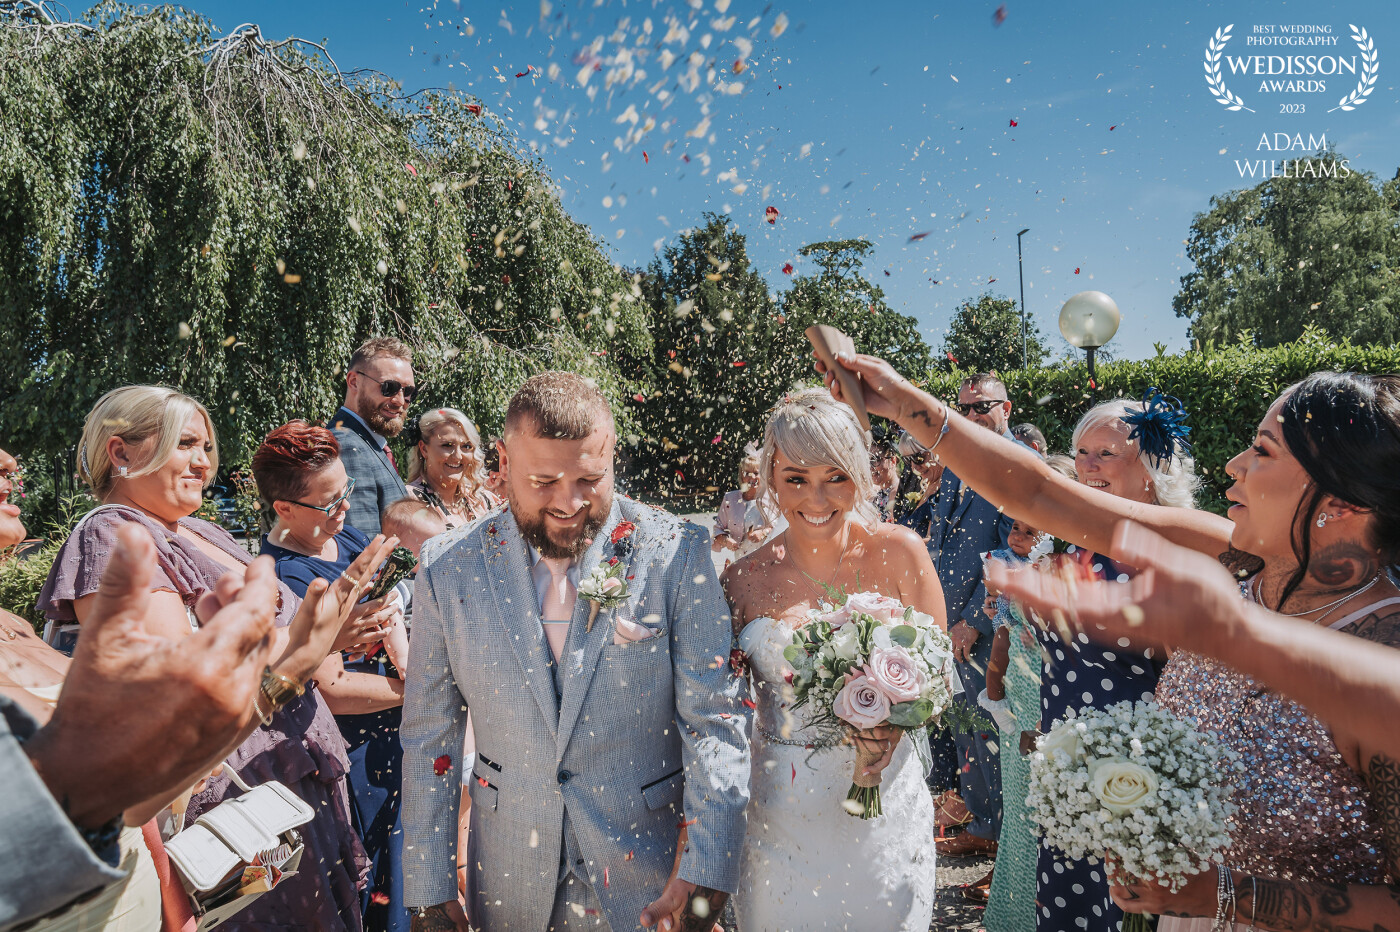 This photo of Sophie & Nathan was taken on the hottest day of the year at Rossett Hall, North Wales. <br />
The blue skies and colourful confetti round off a perfect summers wedding day.